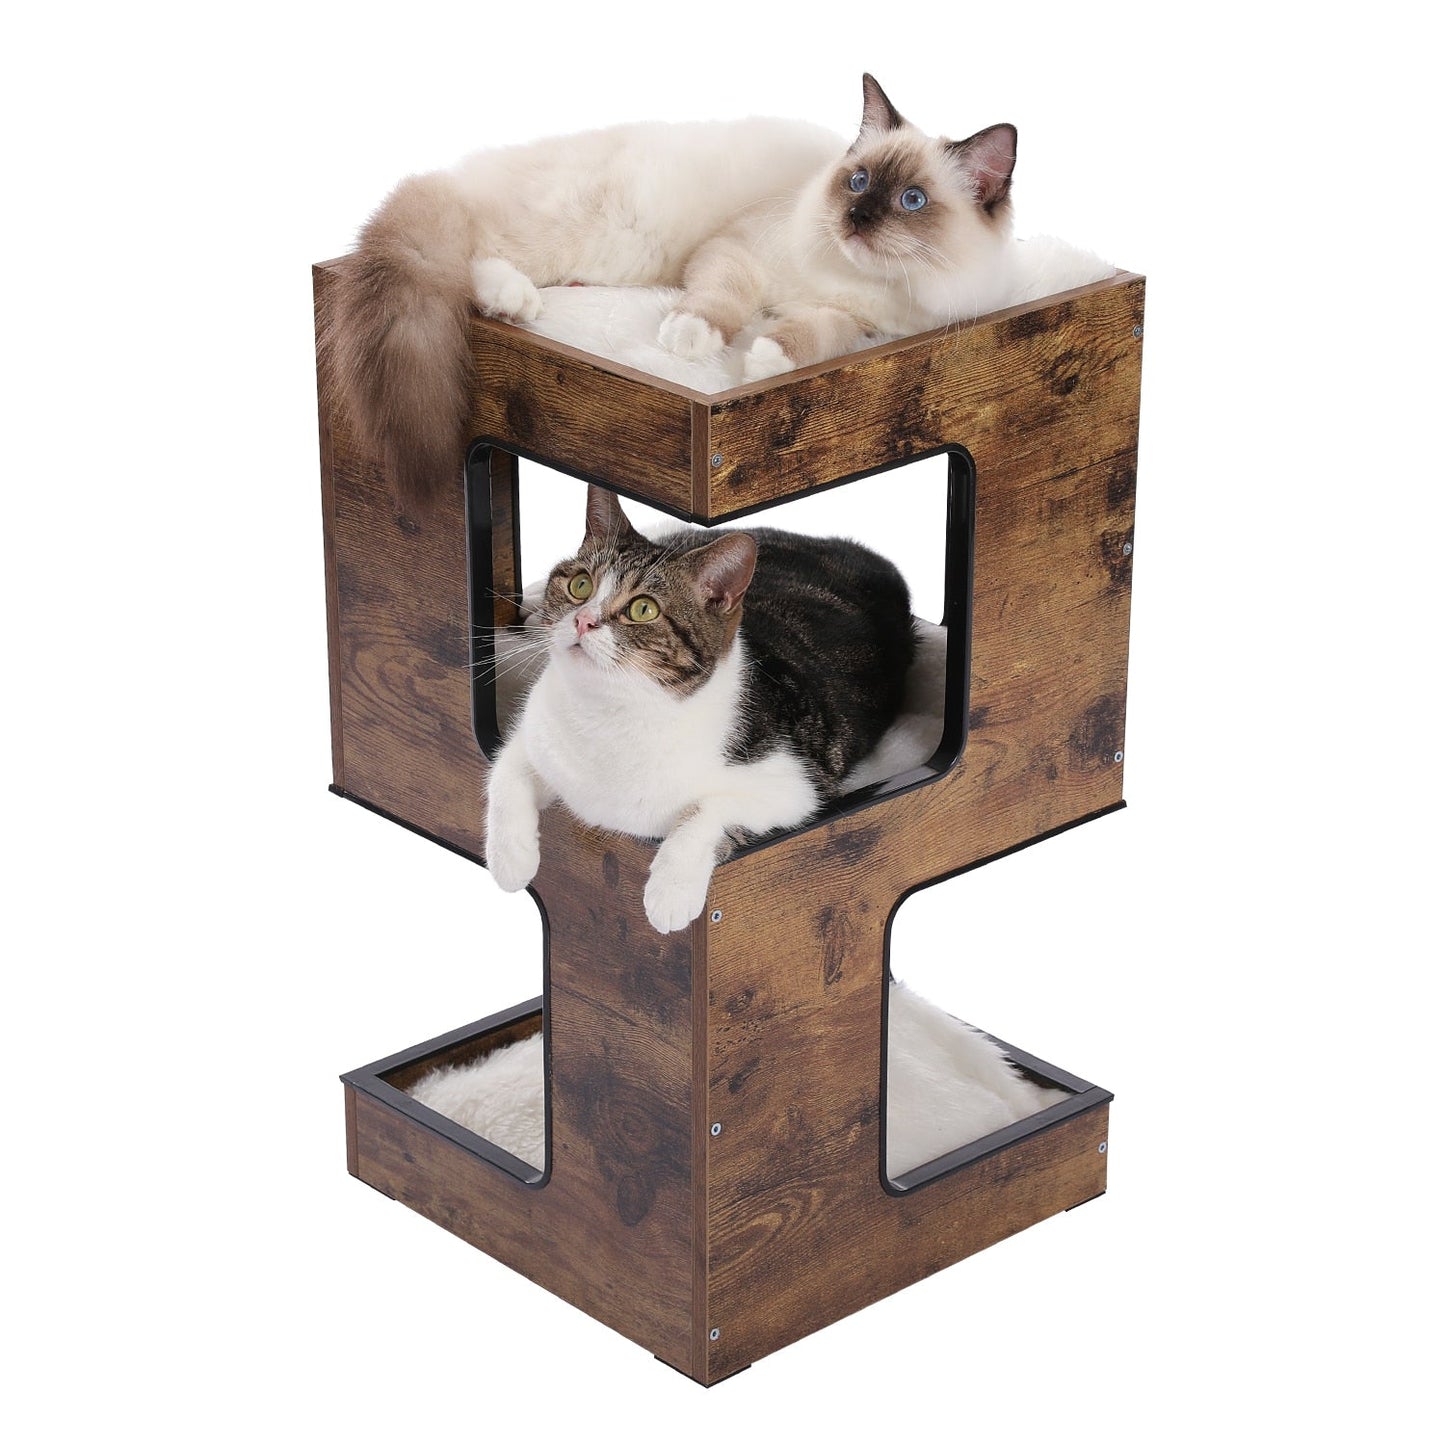 cats chilling in the boho cat tree